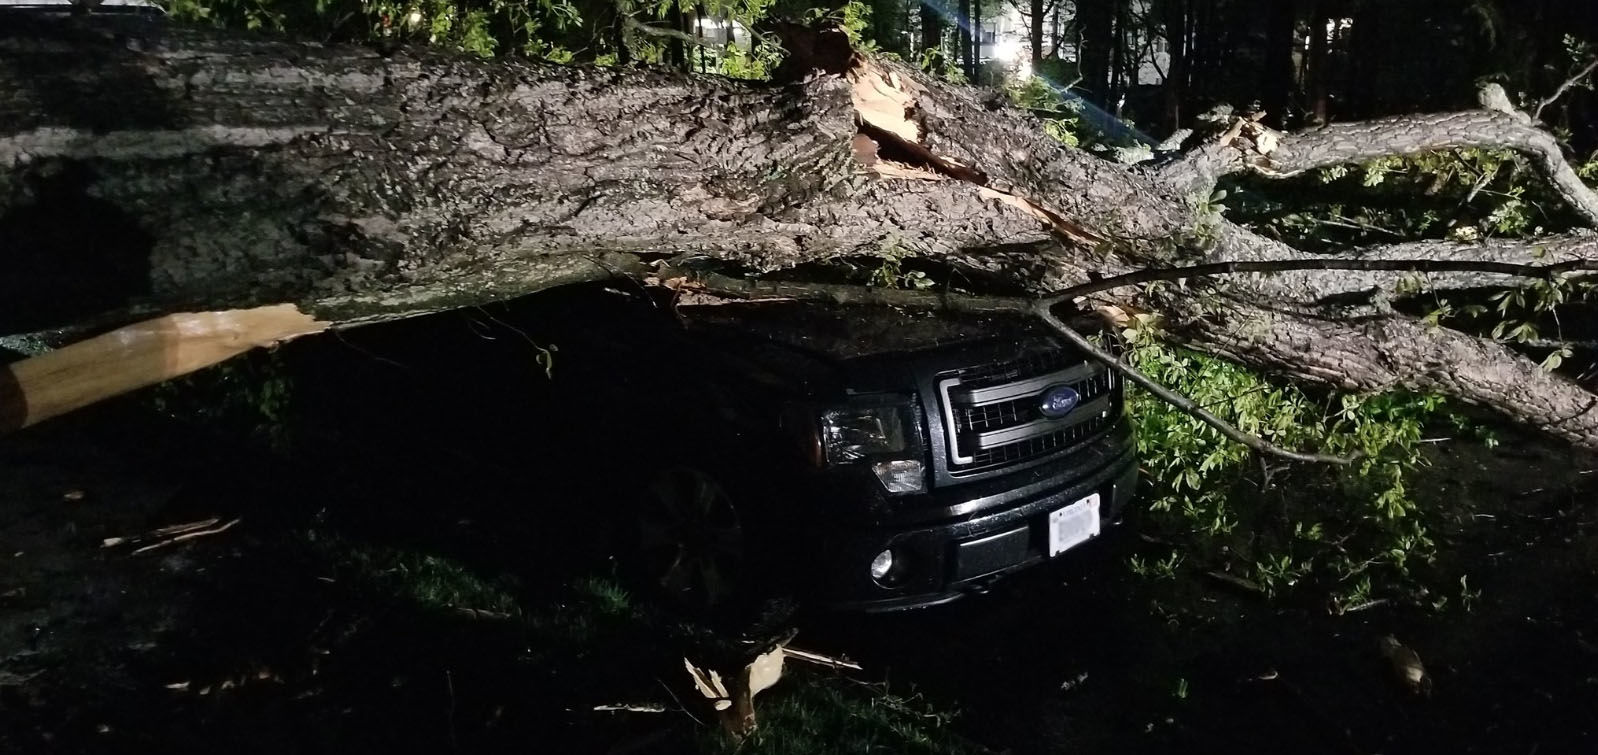 A tree falls on a vehicle in Reston, Virginia, on Friday, April 19, 2019, after two storms passed through the area. (Courtesy Greg in Reston)